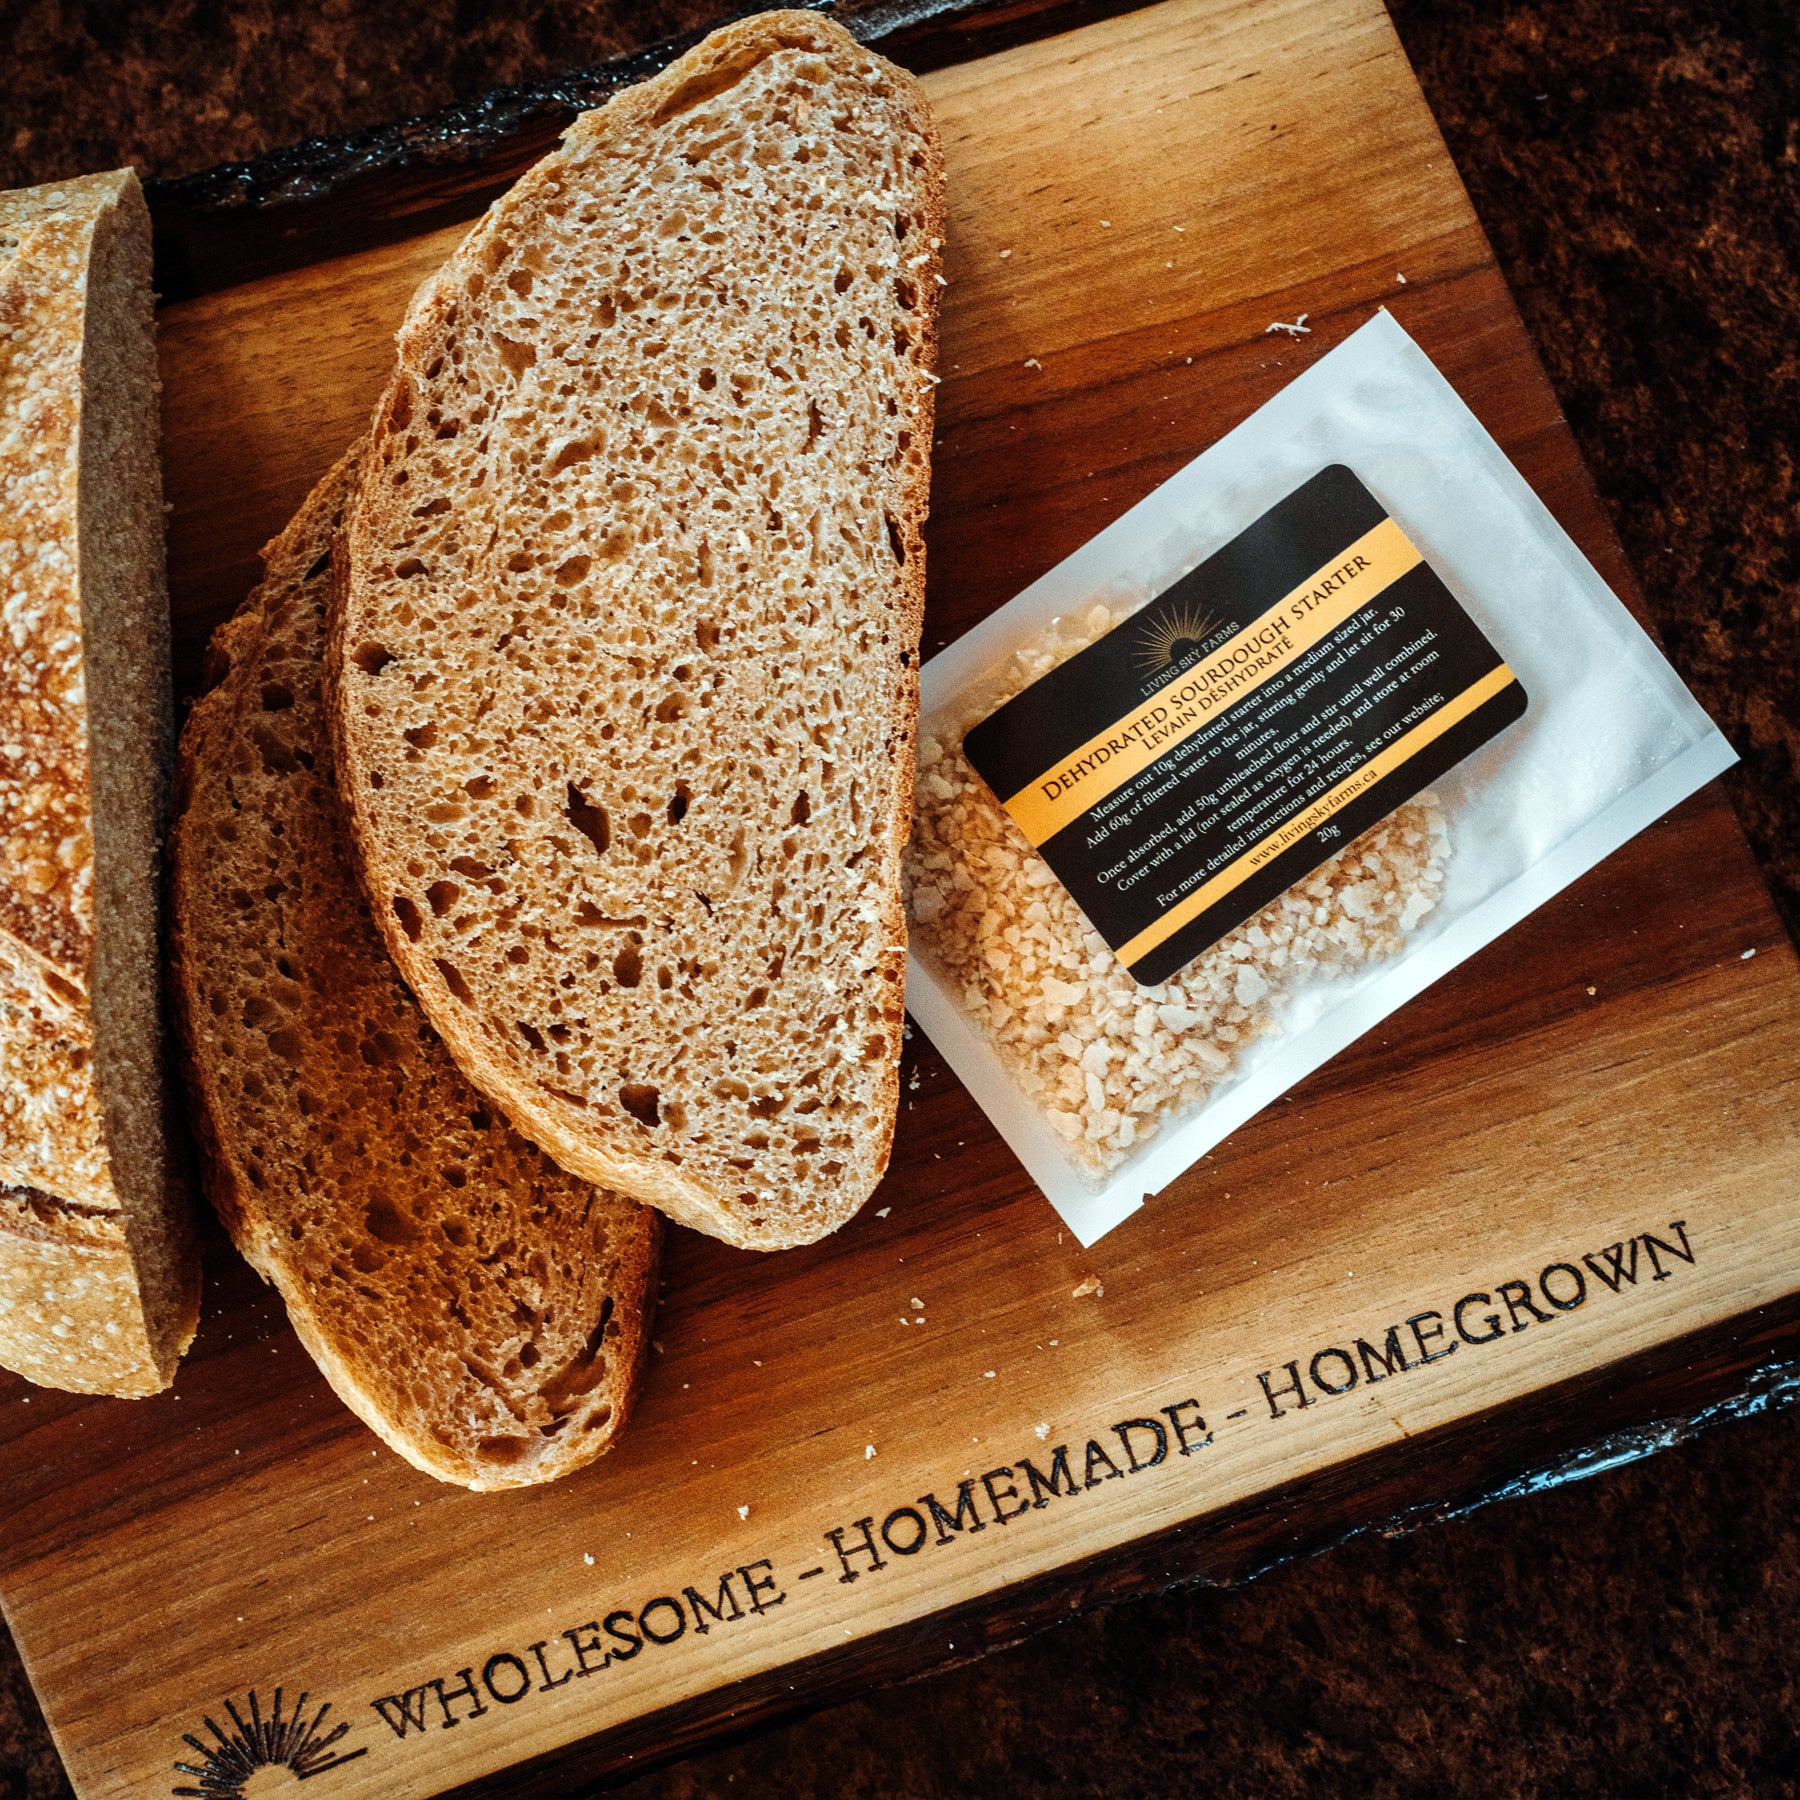 Living Sky Farm's Dehydrated Sourdough Starter with Sourdough bread on a wooden cutting board.